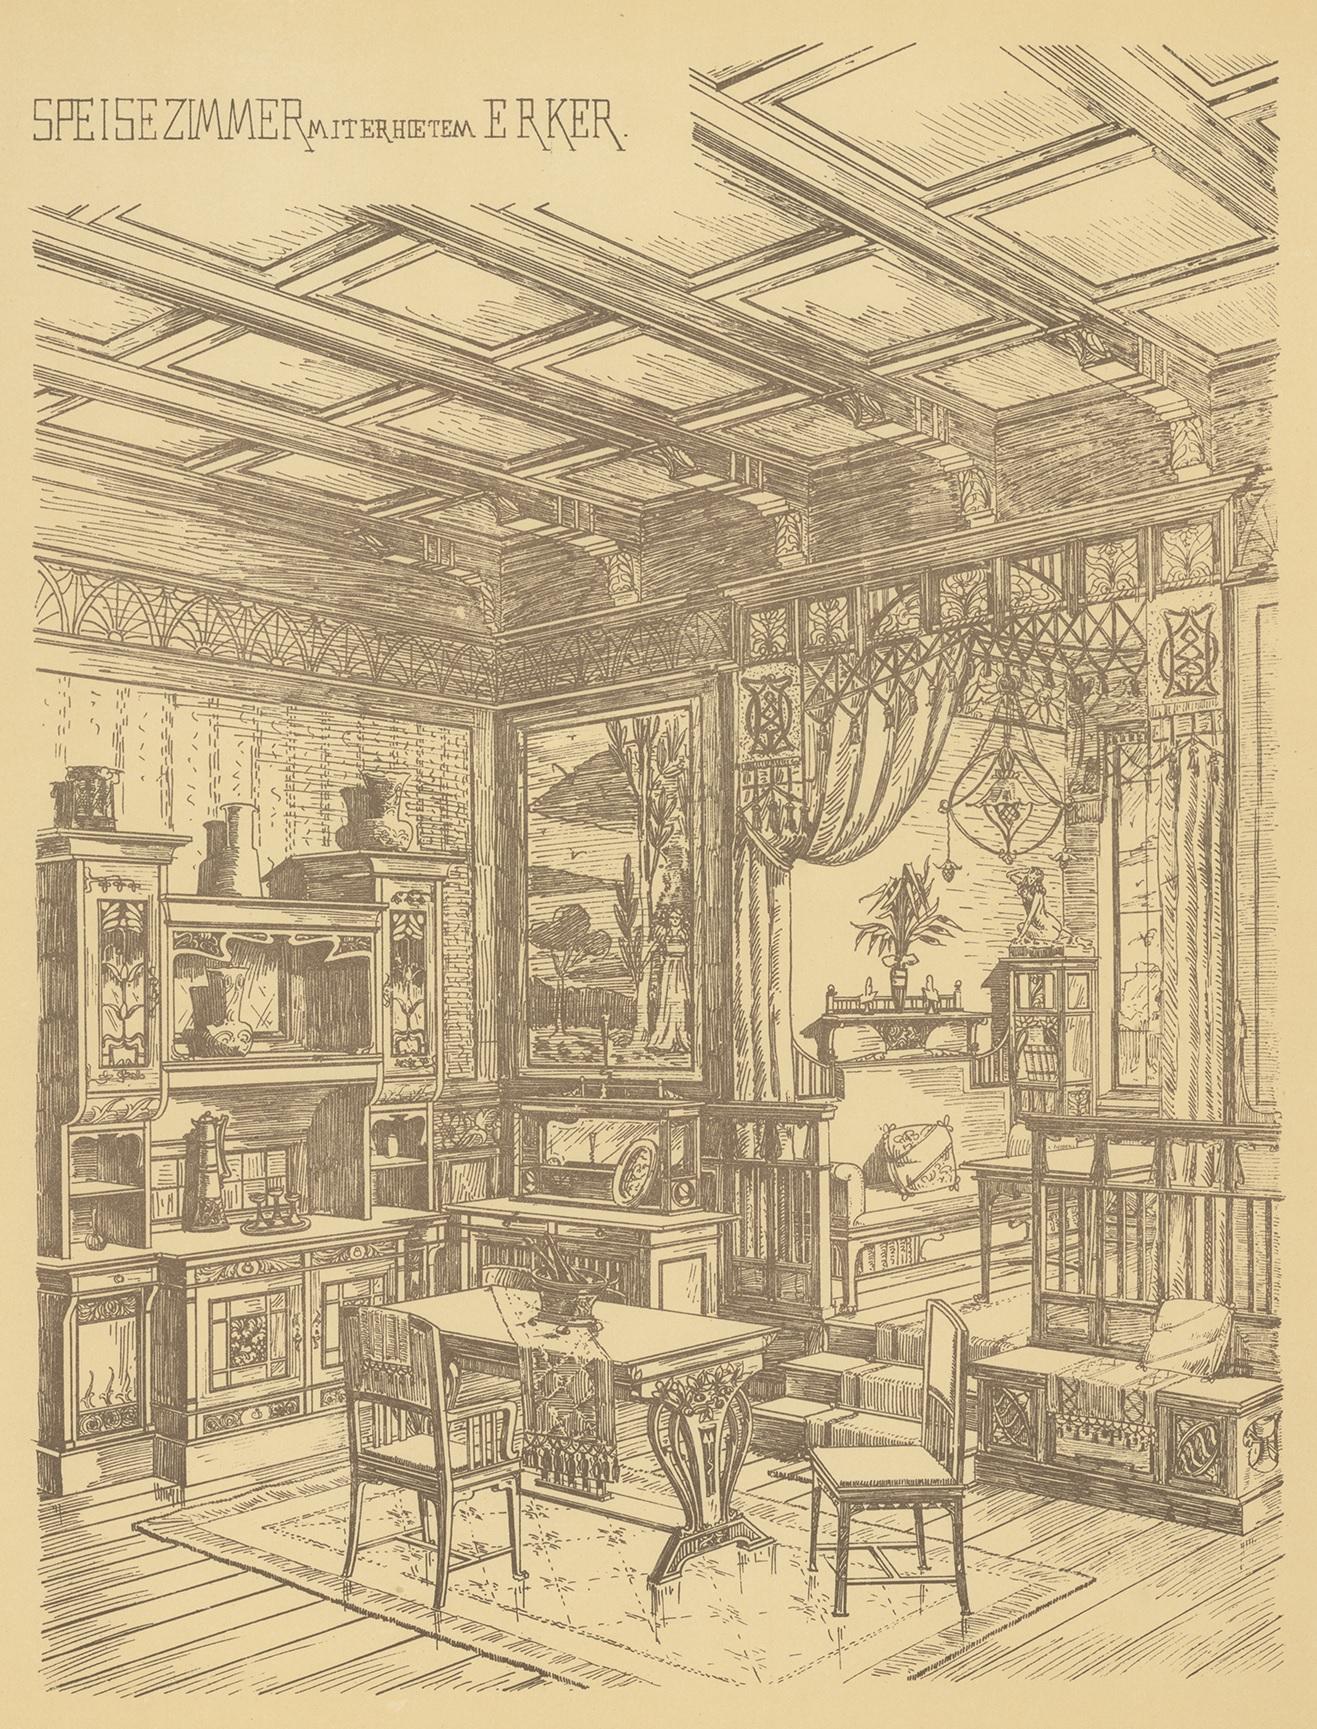 Antique print titled 'Speisezimmer mit erhietem Erker'. Lithograph of a dining room with bay window. This print originates from 'Det Moderna Hemmet' by Johannes Kramer. Published by Ferdinand Hey'l, circa 1910.